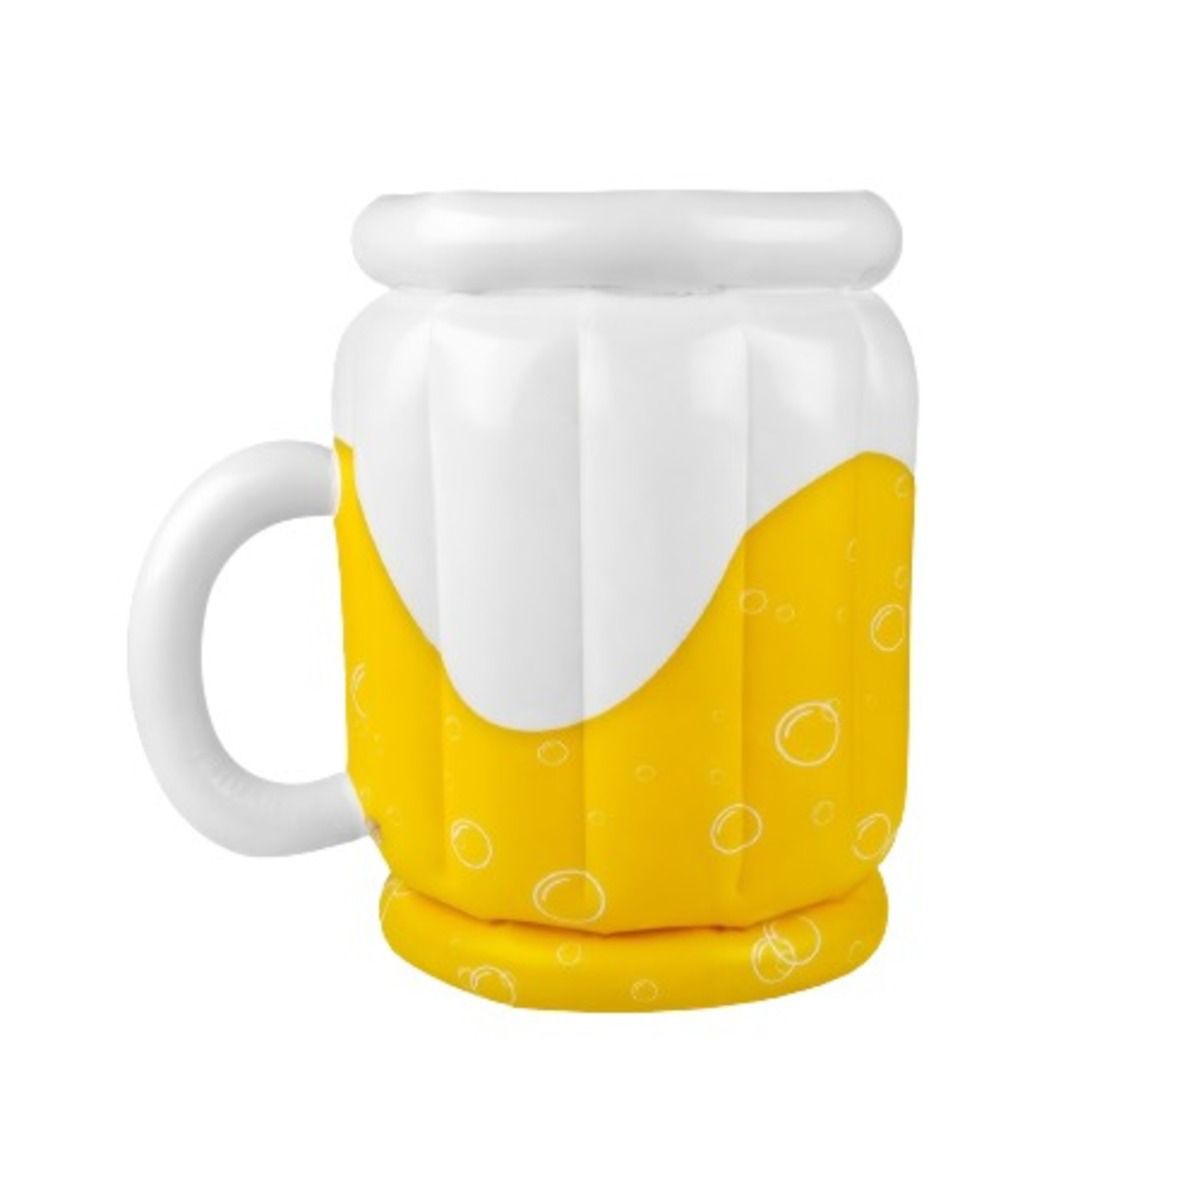 Pvc Inflatable Beer Mug Ice Bucket, Unique Style, Ideal For Bbq, Pool Party And More Department Store